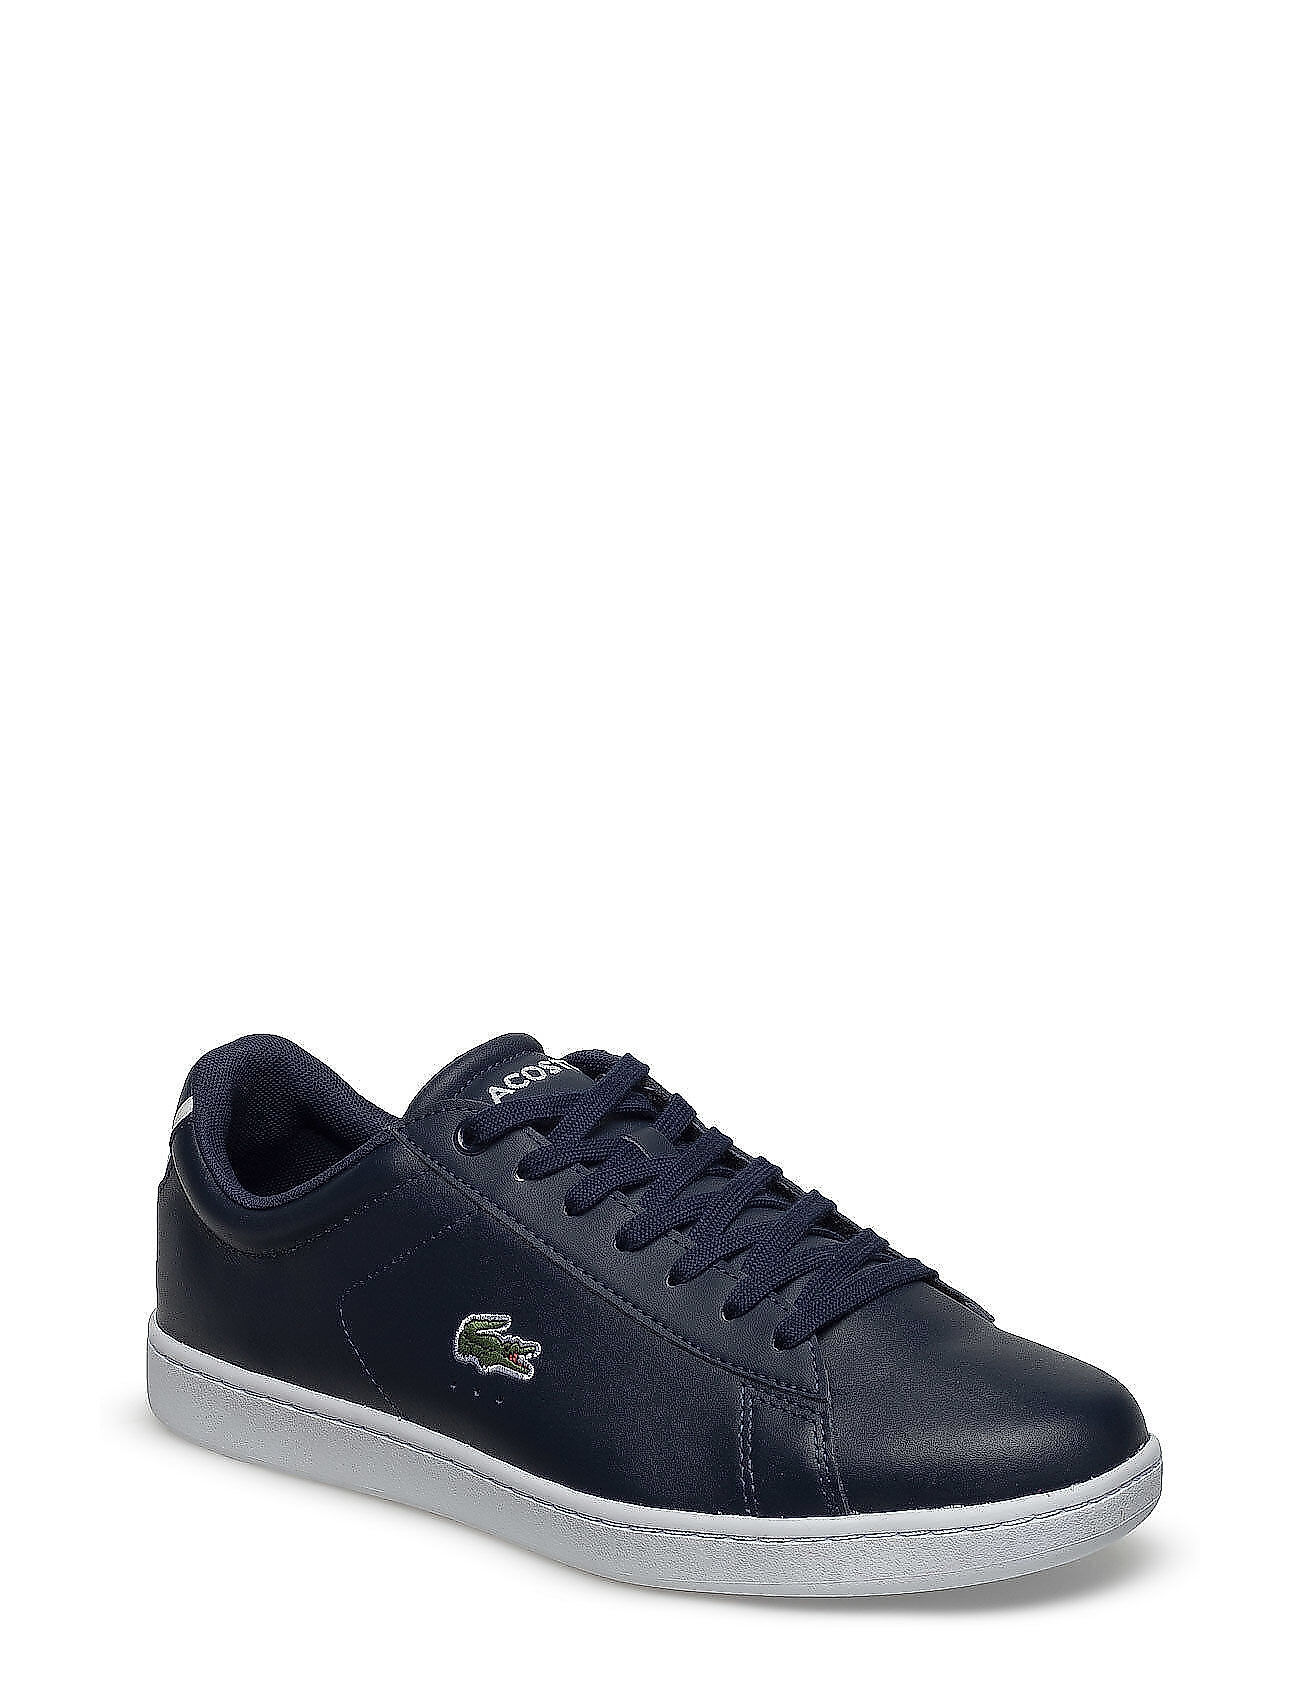 Lacoste Shoes Carnaby Evo Bl 1 Sma Lave Sneakers Blå Lacoste Shoes